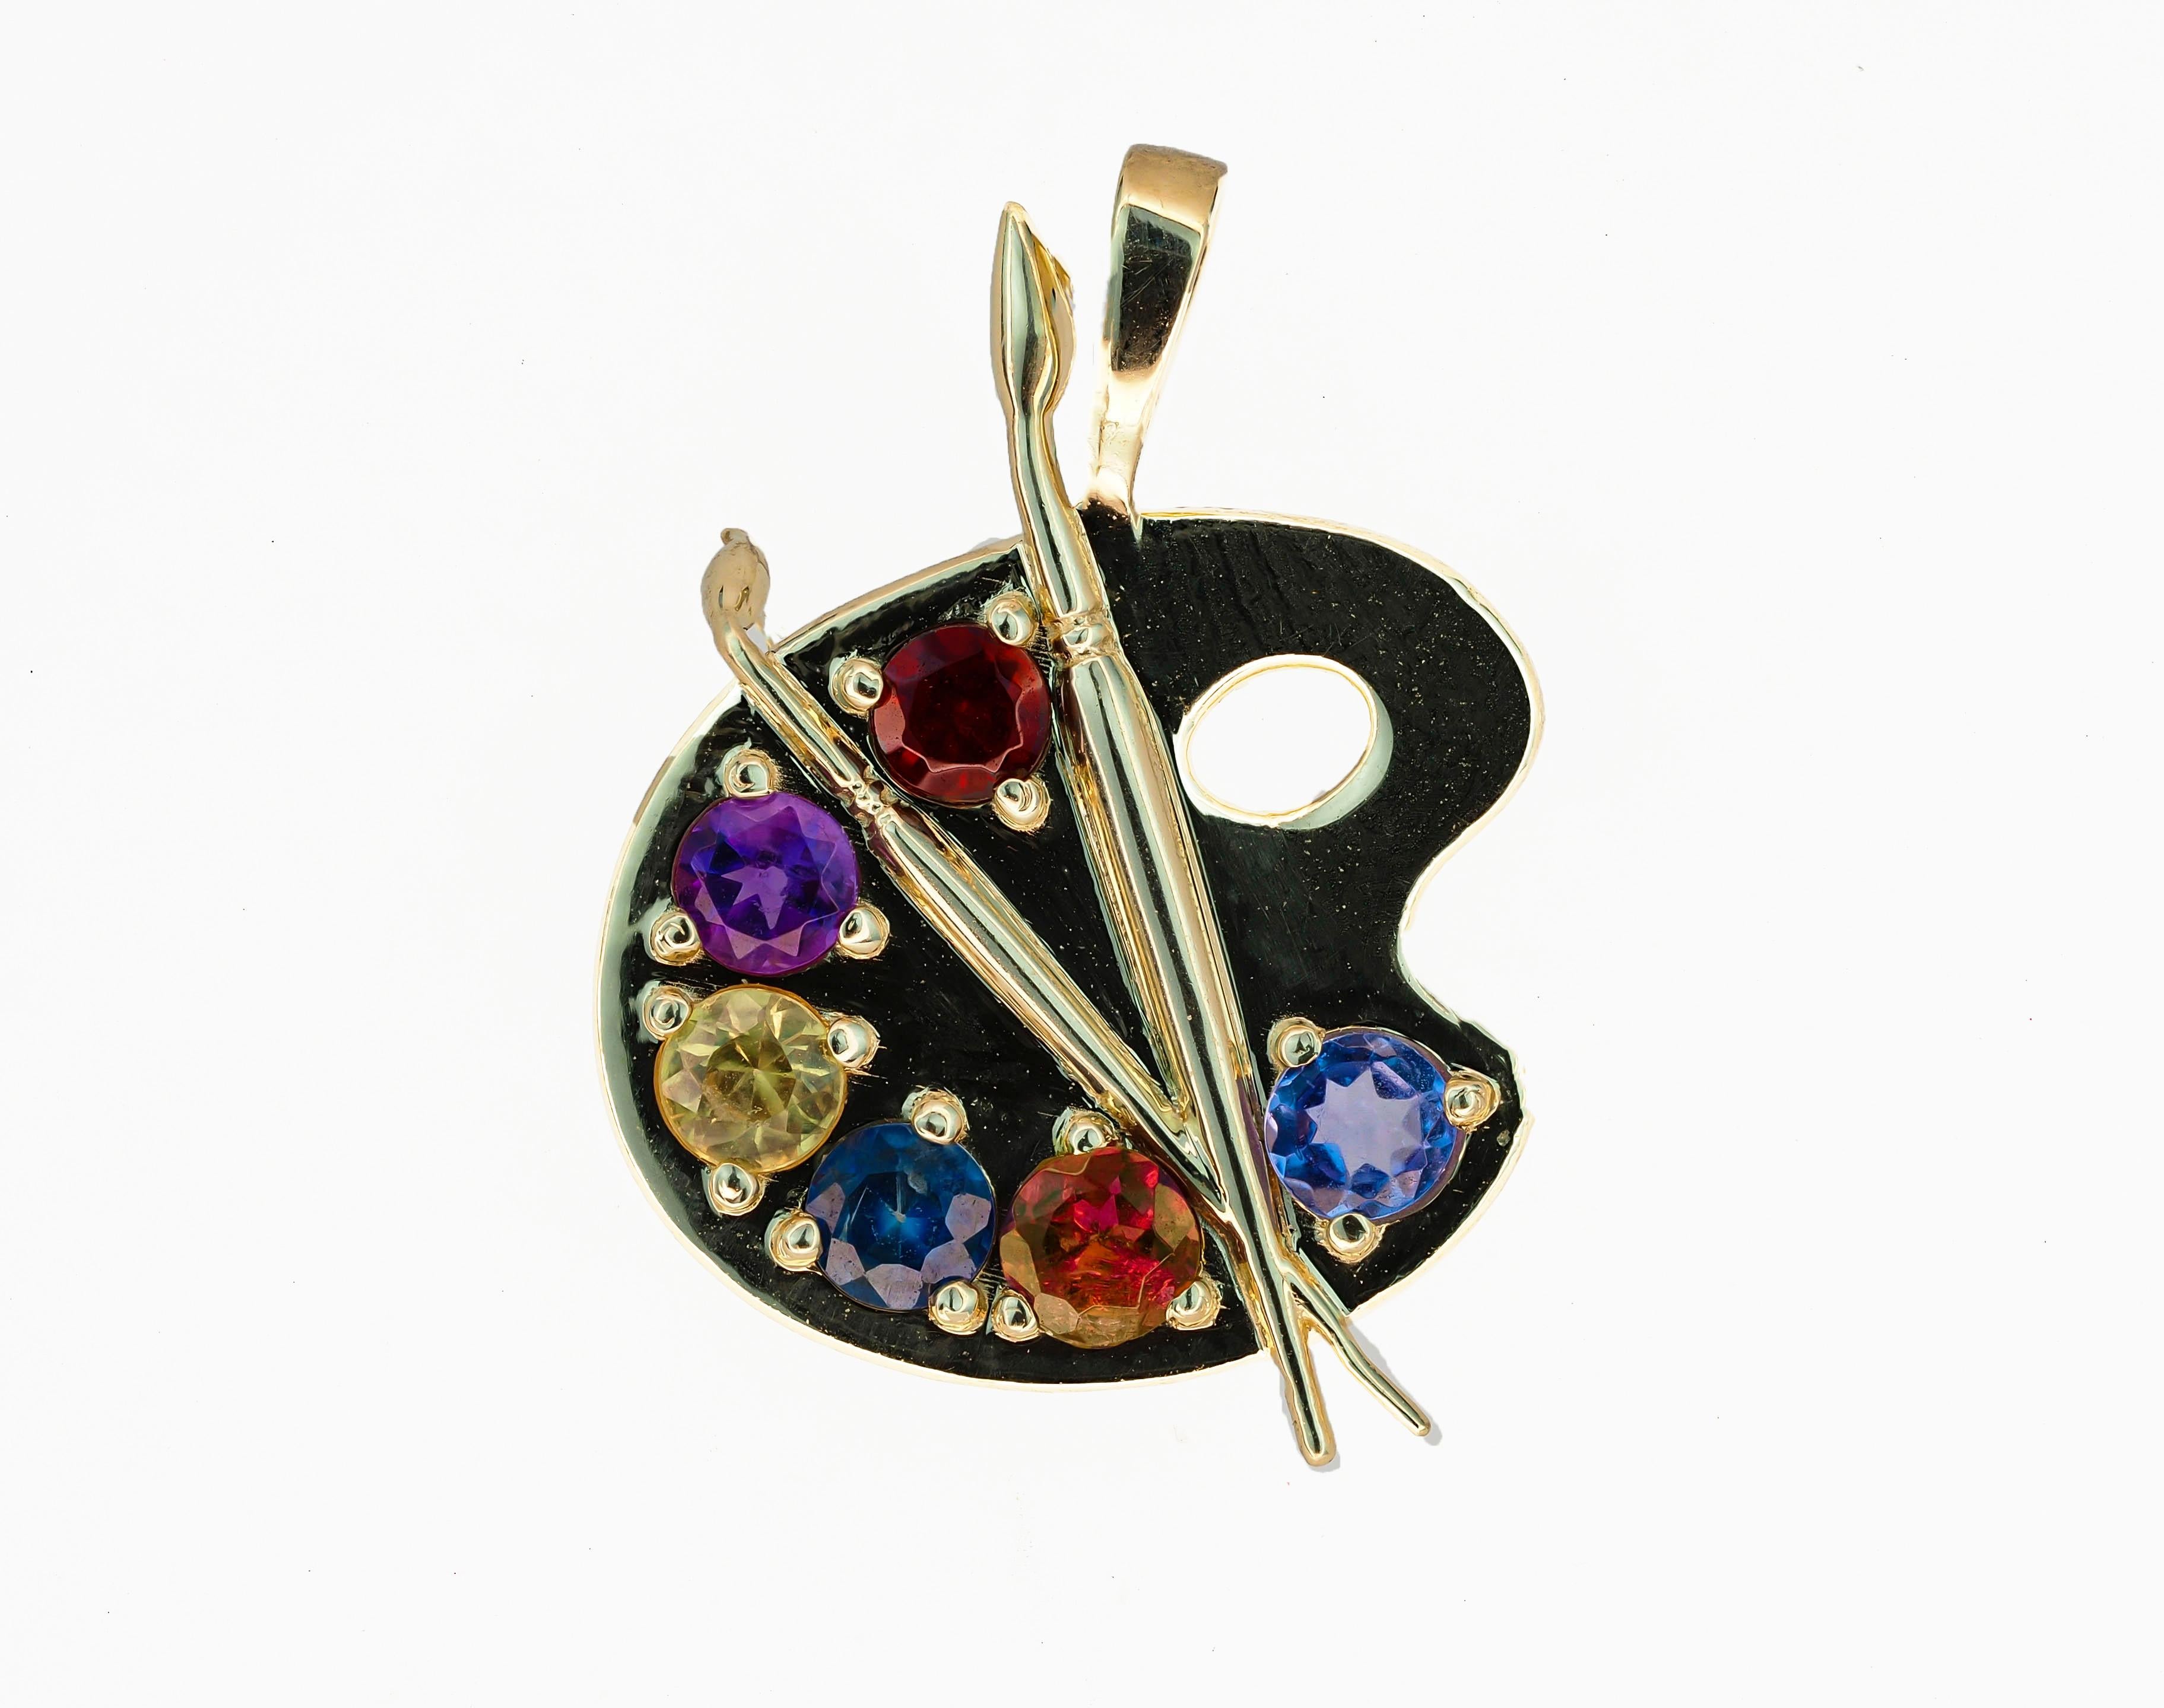 Palette with Paints 14k Gold Pendant with Colored Stones For Sale 3